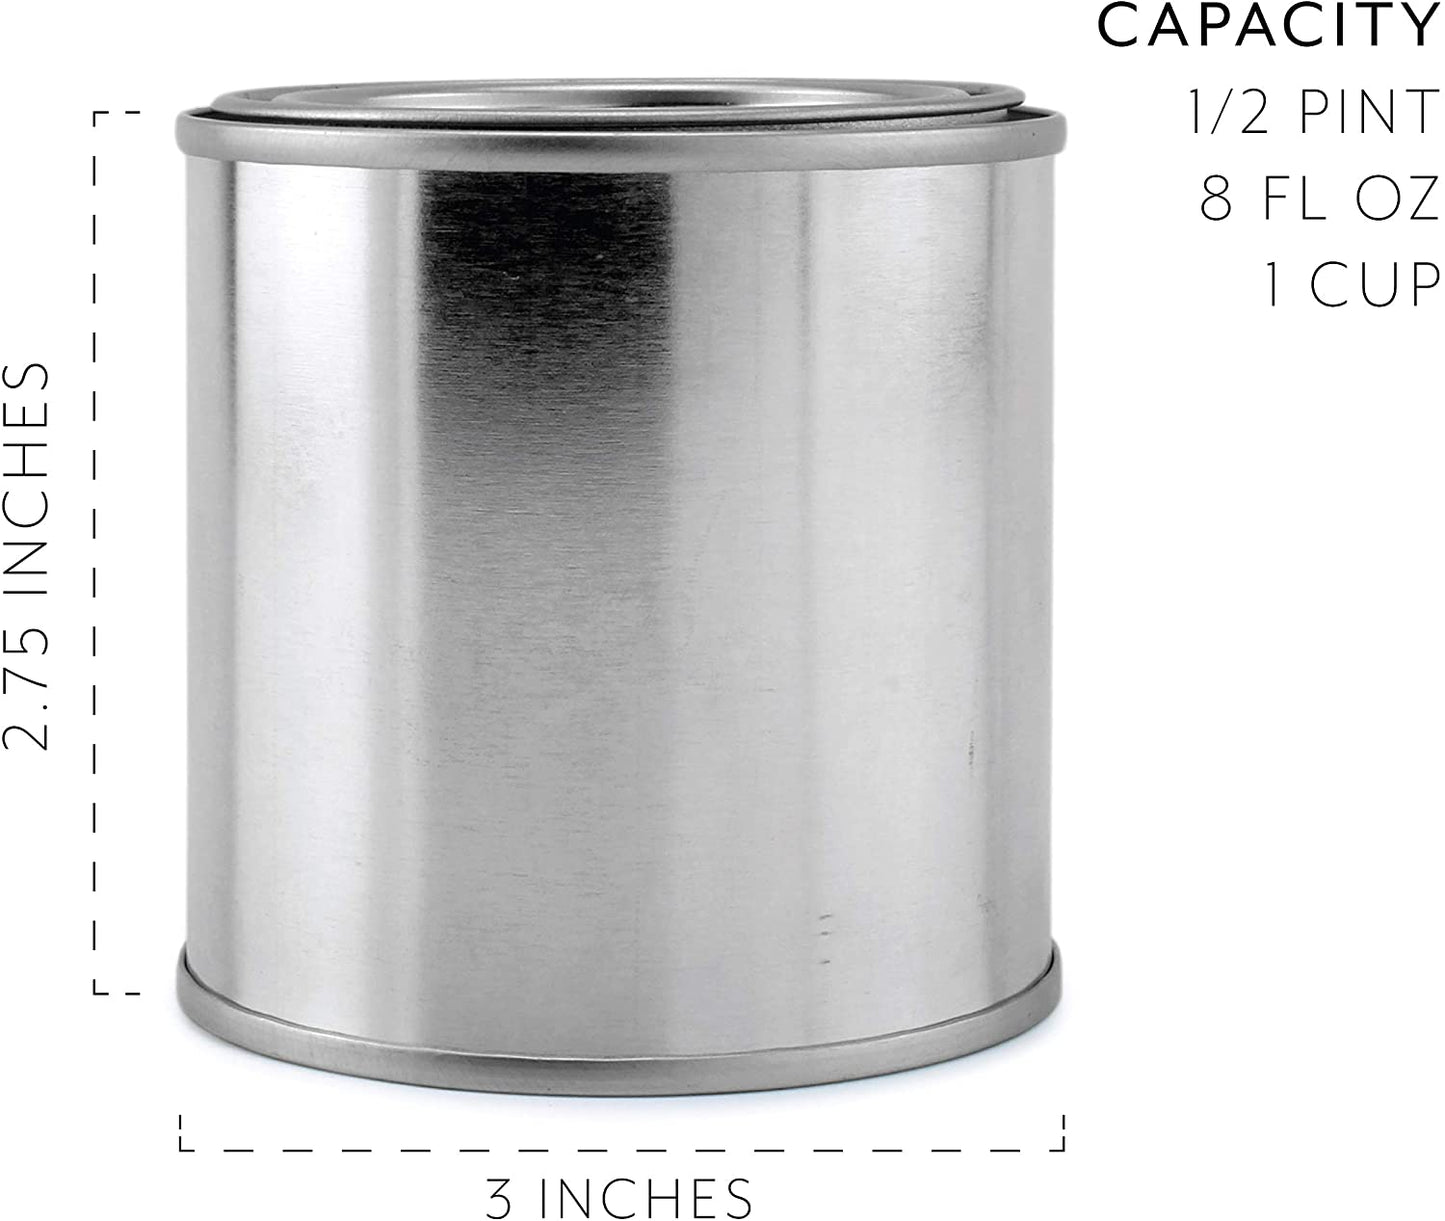 Metal Paint Cans with Lids (1/2 Pint Size, 6-Pack) - sh1750cb0half